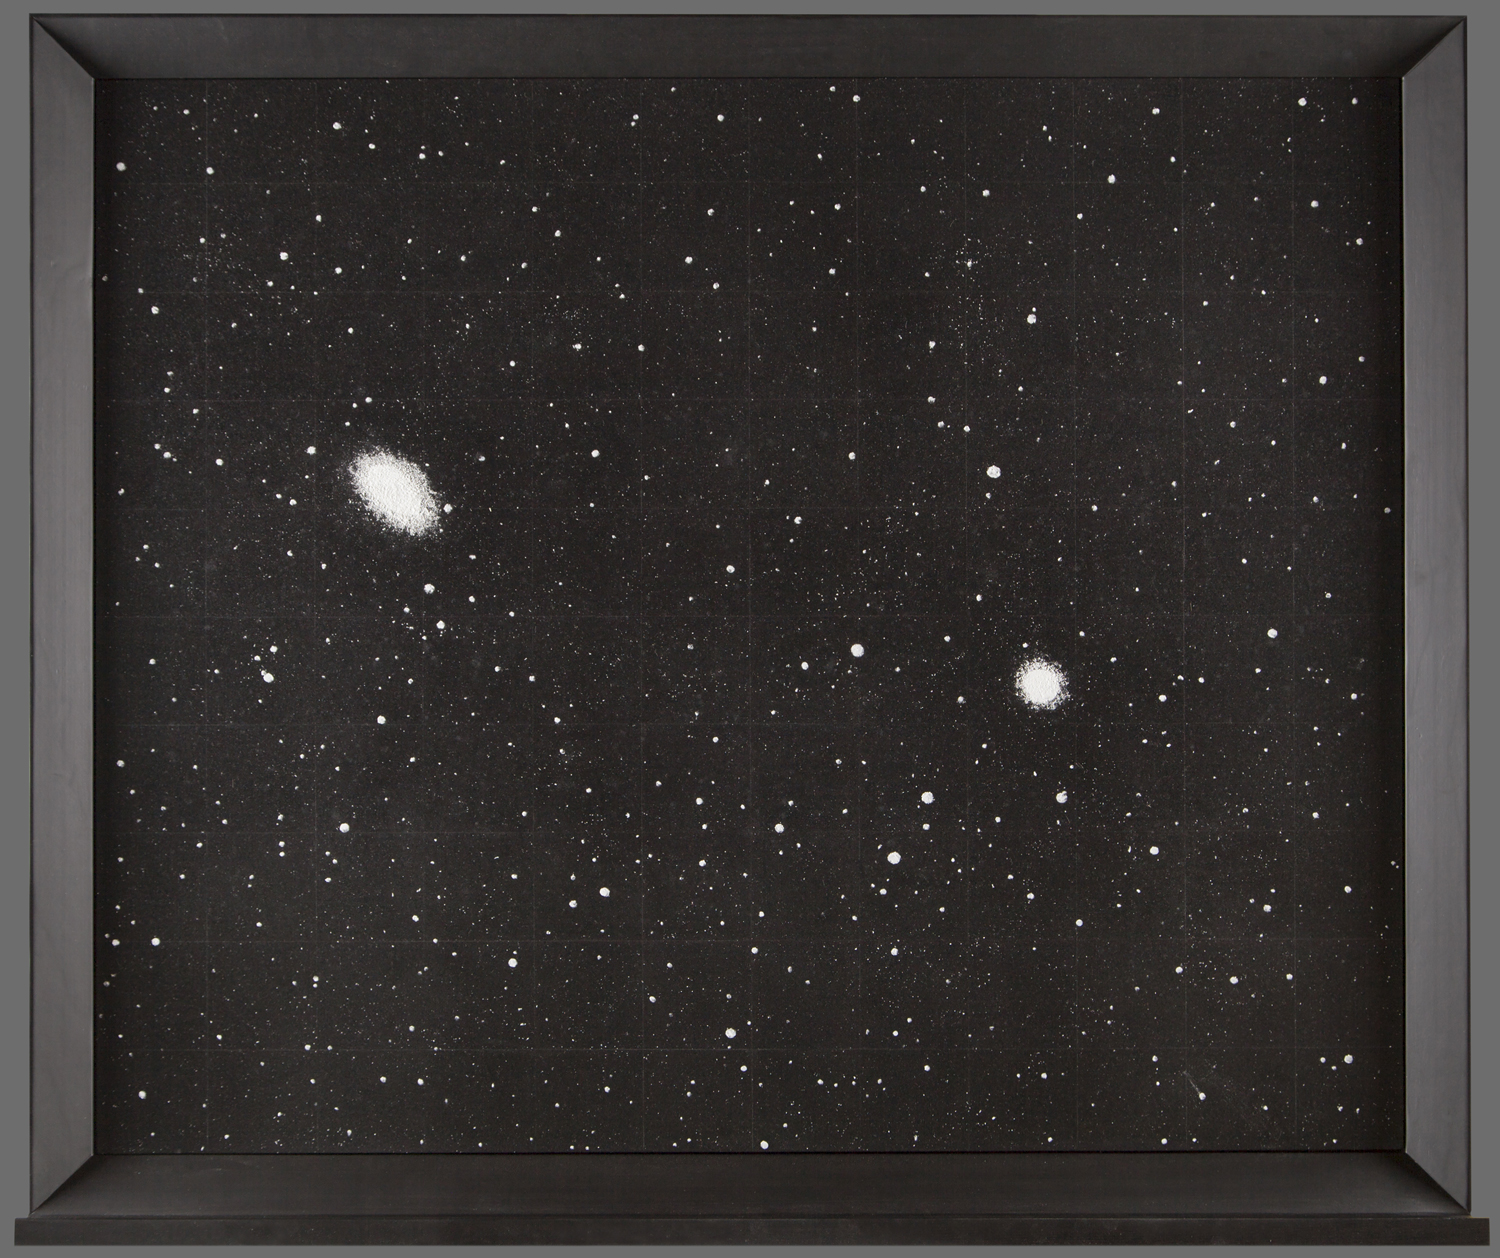 Dust (NGC 1549 and NGC 1553,a galaxy pair in Dorad